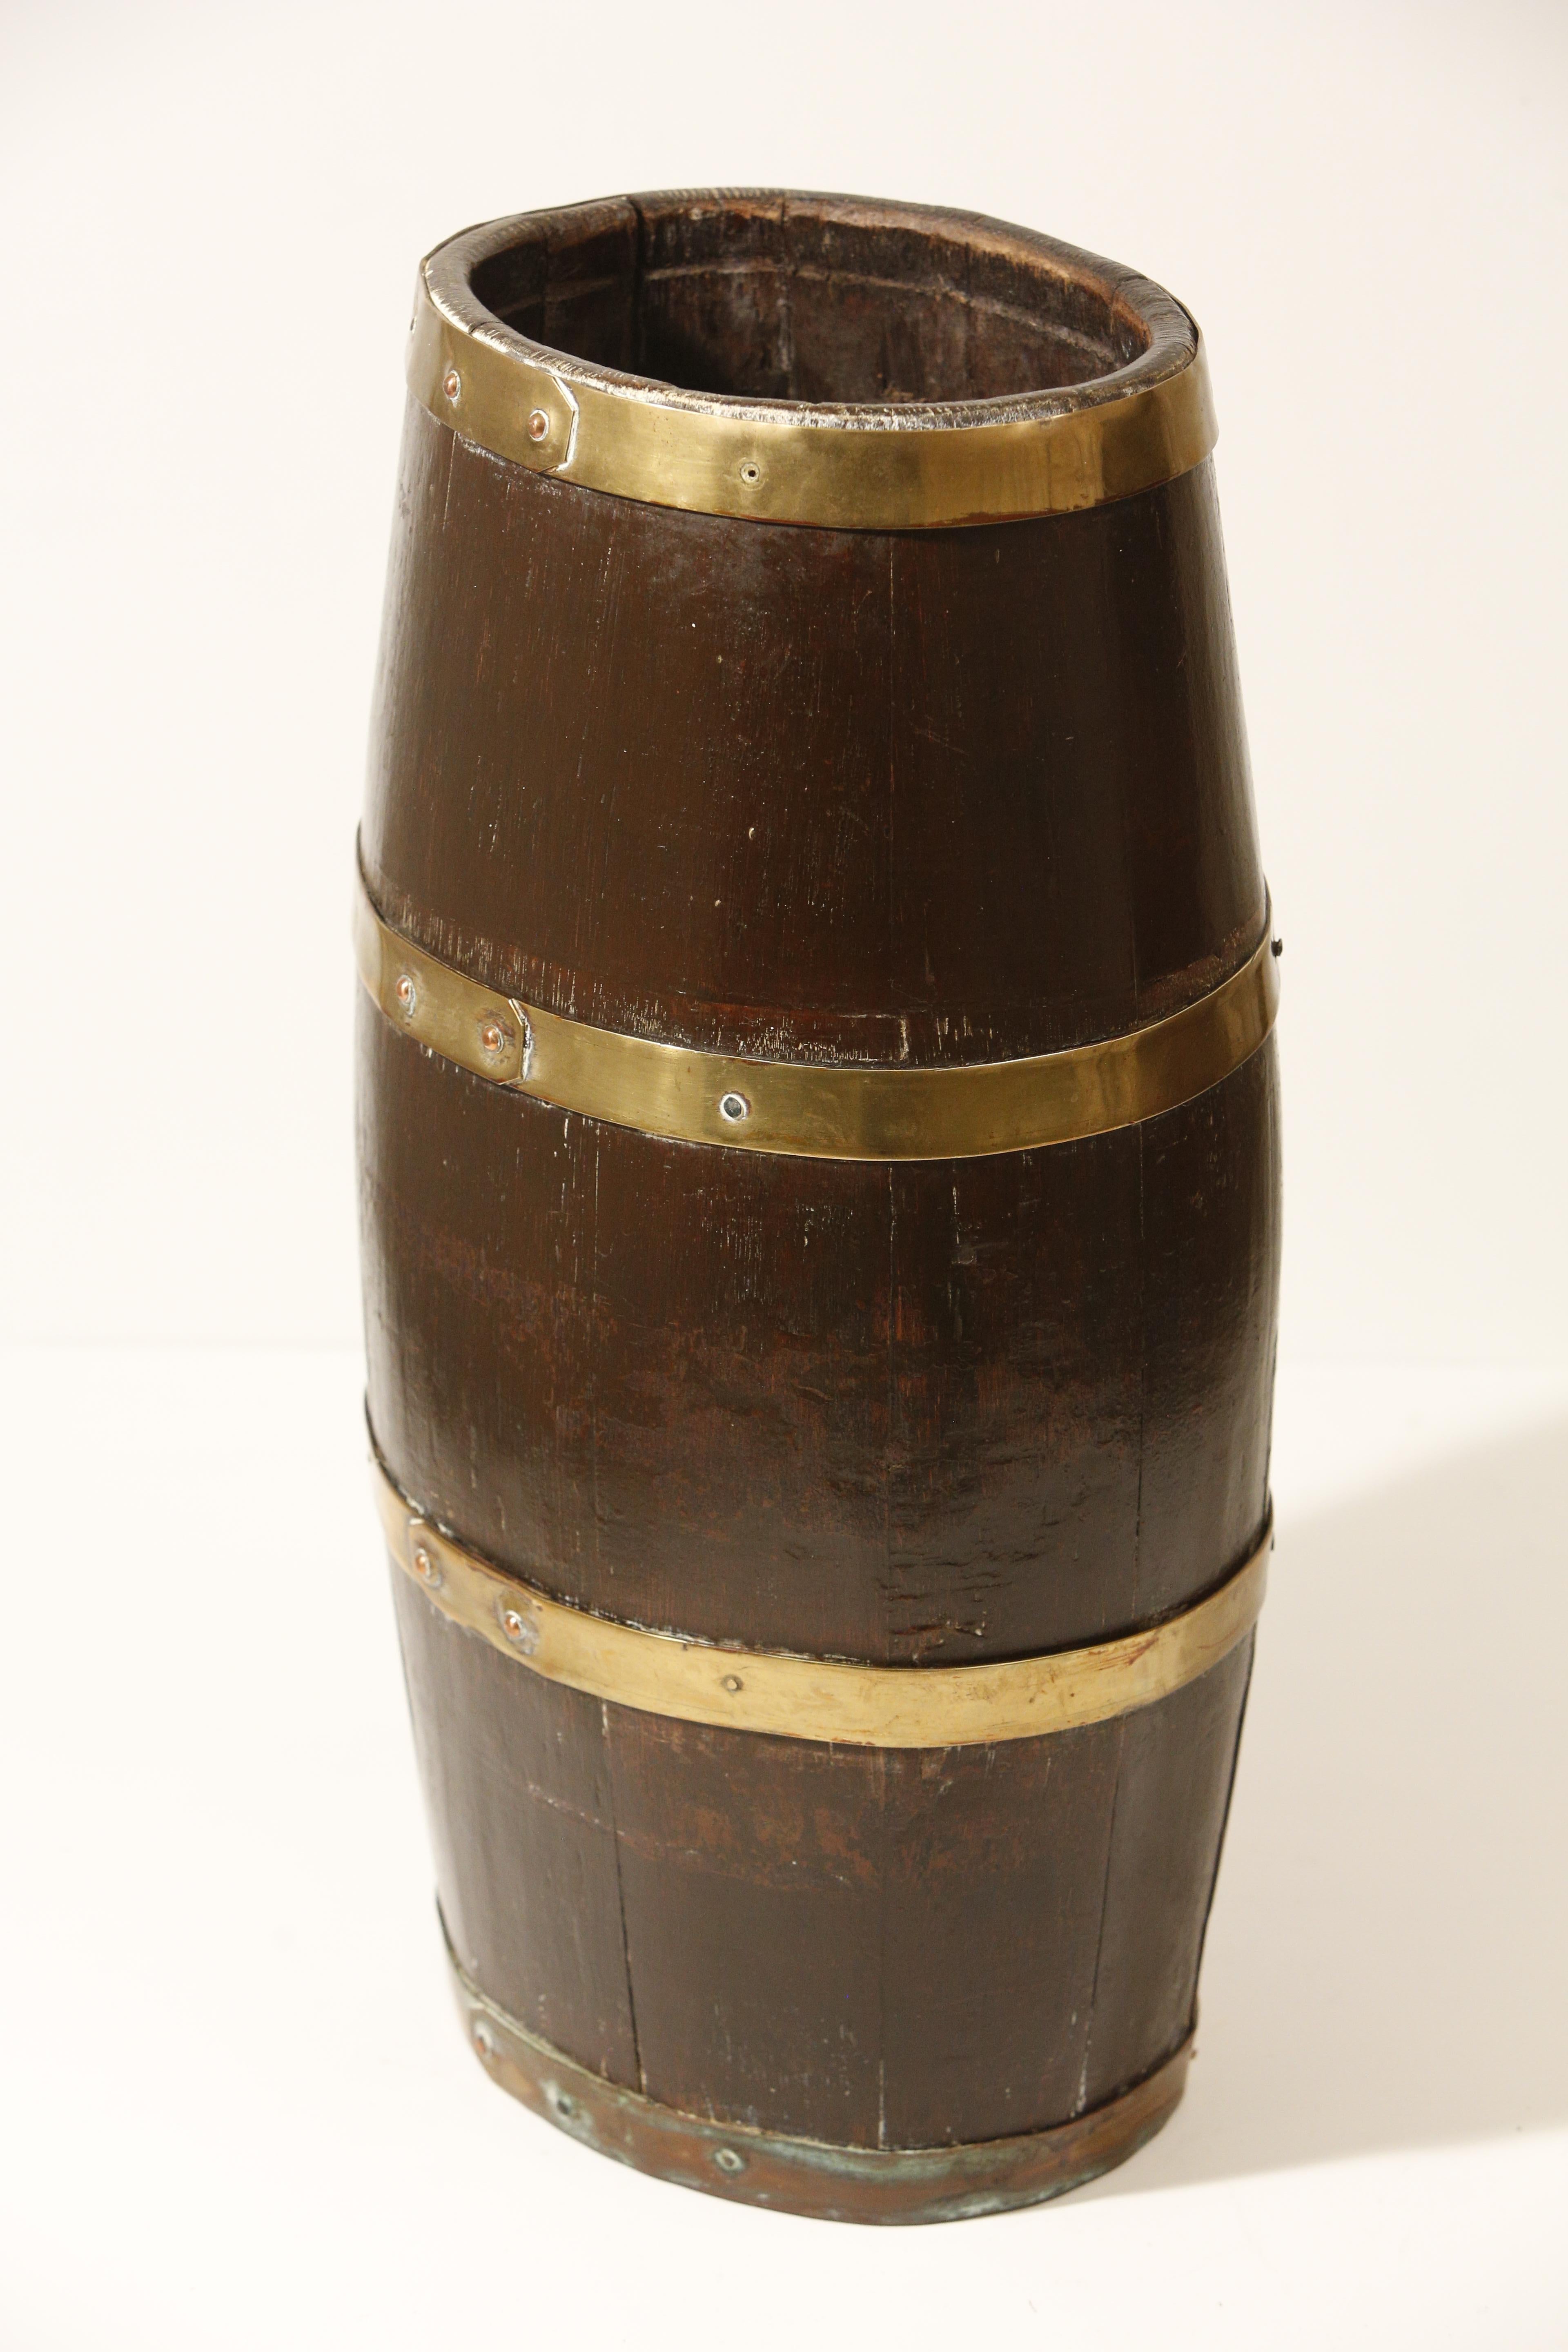 Oak Barrel Umbrella Stand with Brass Braces English Coat of Arms 19th Century For Sale 2